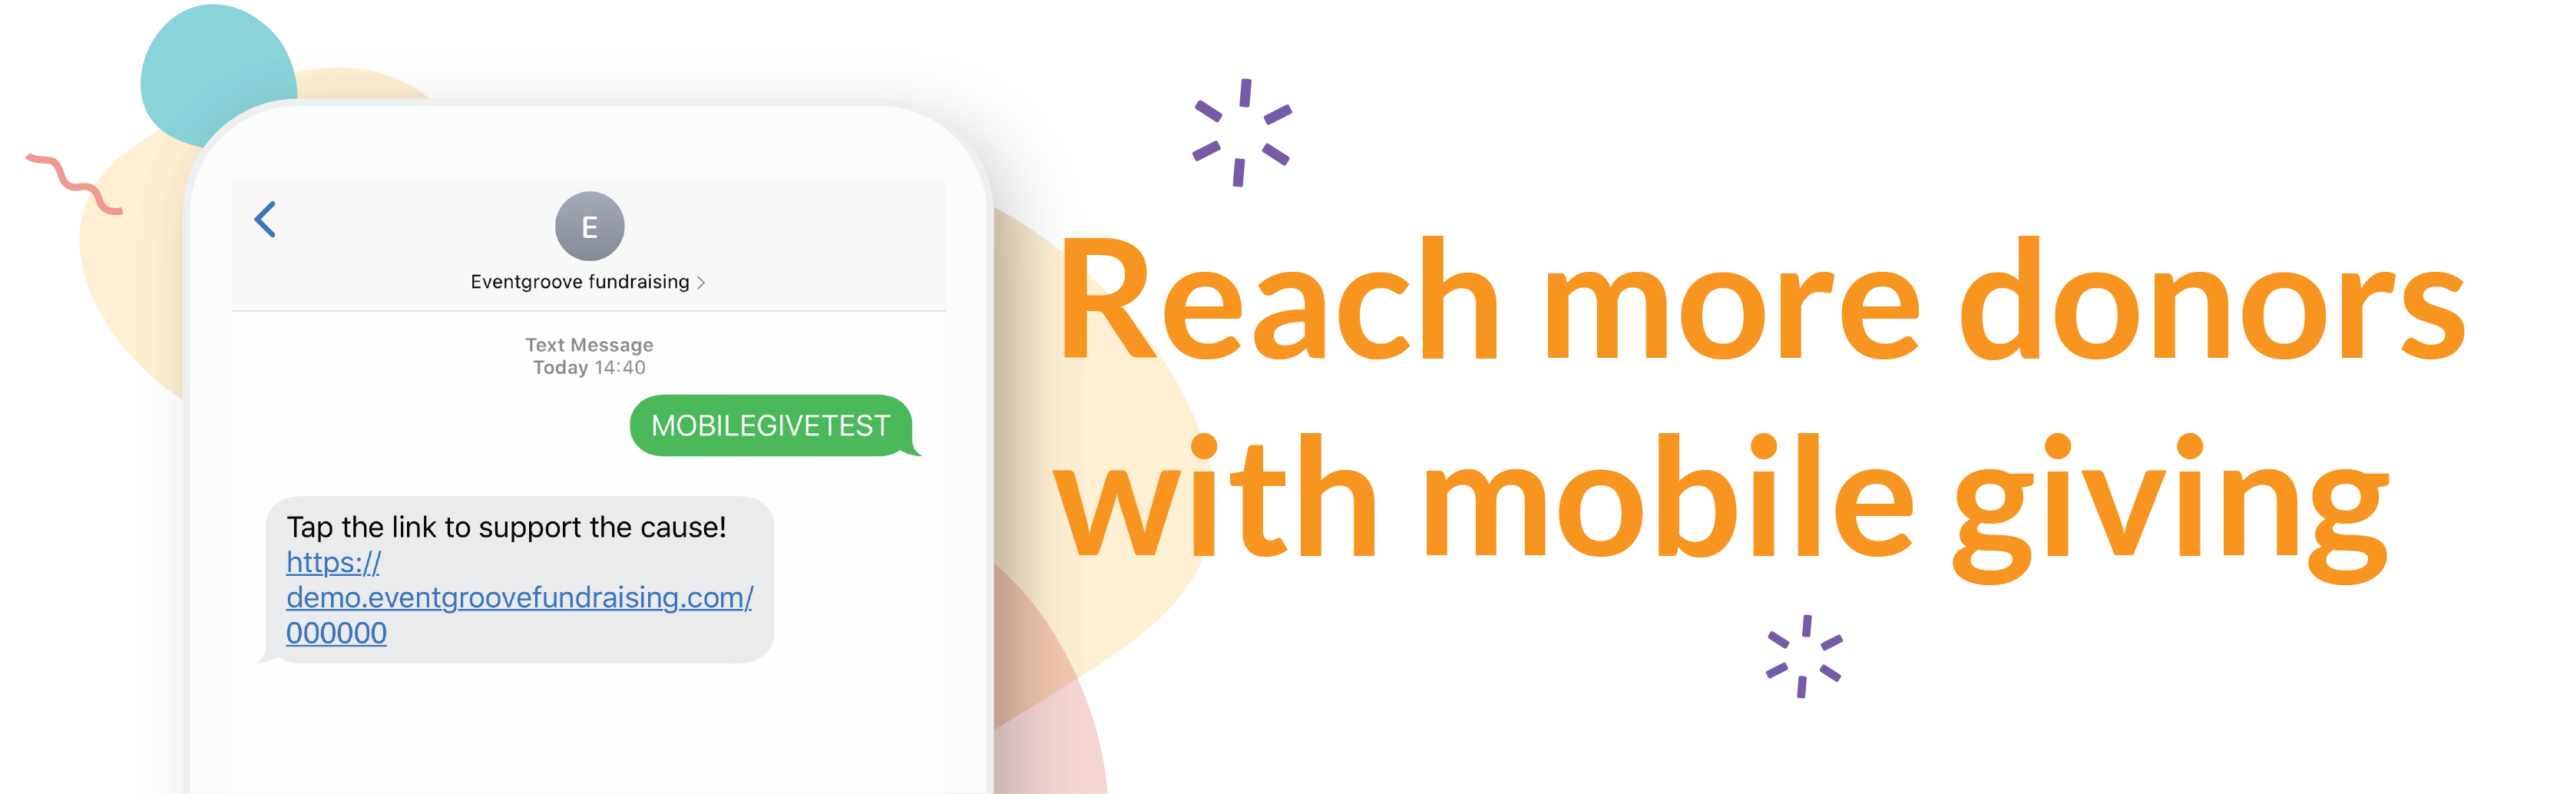 Reach more donors with mobile giving